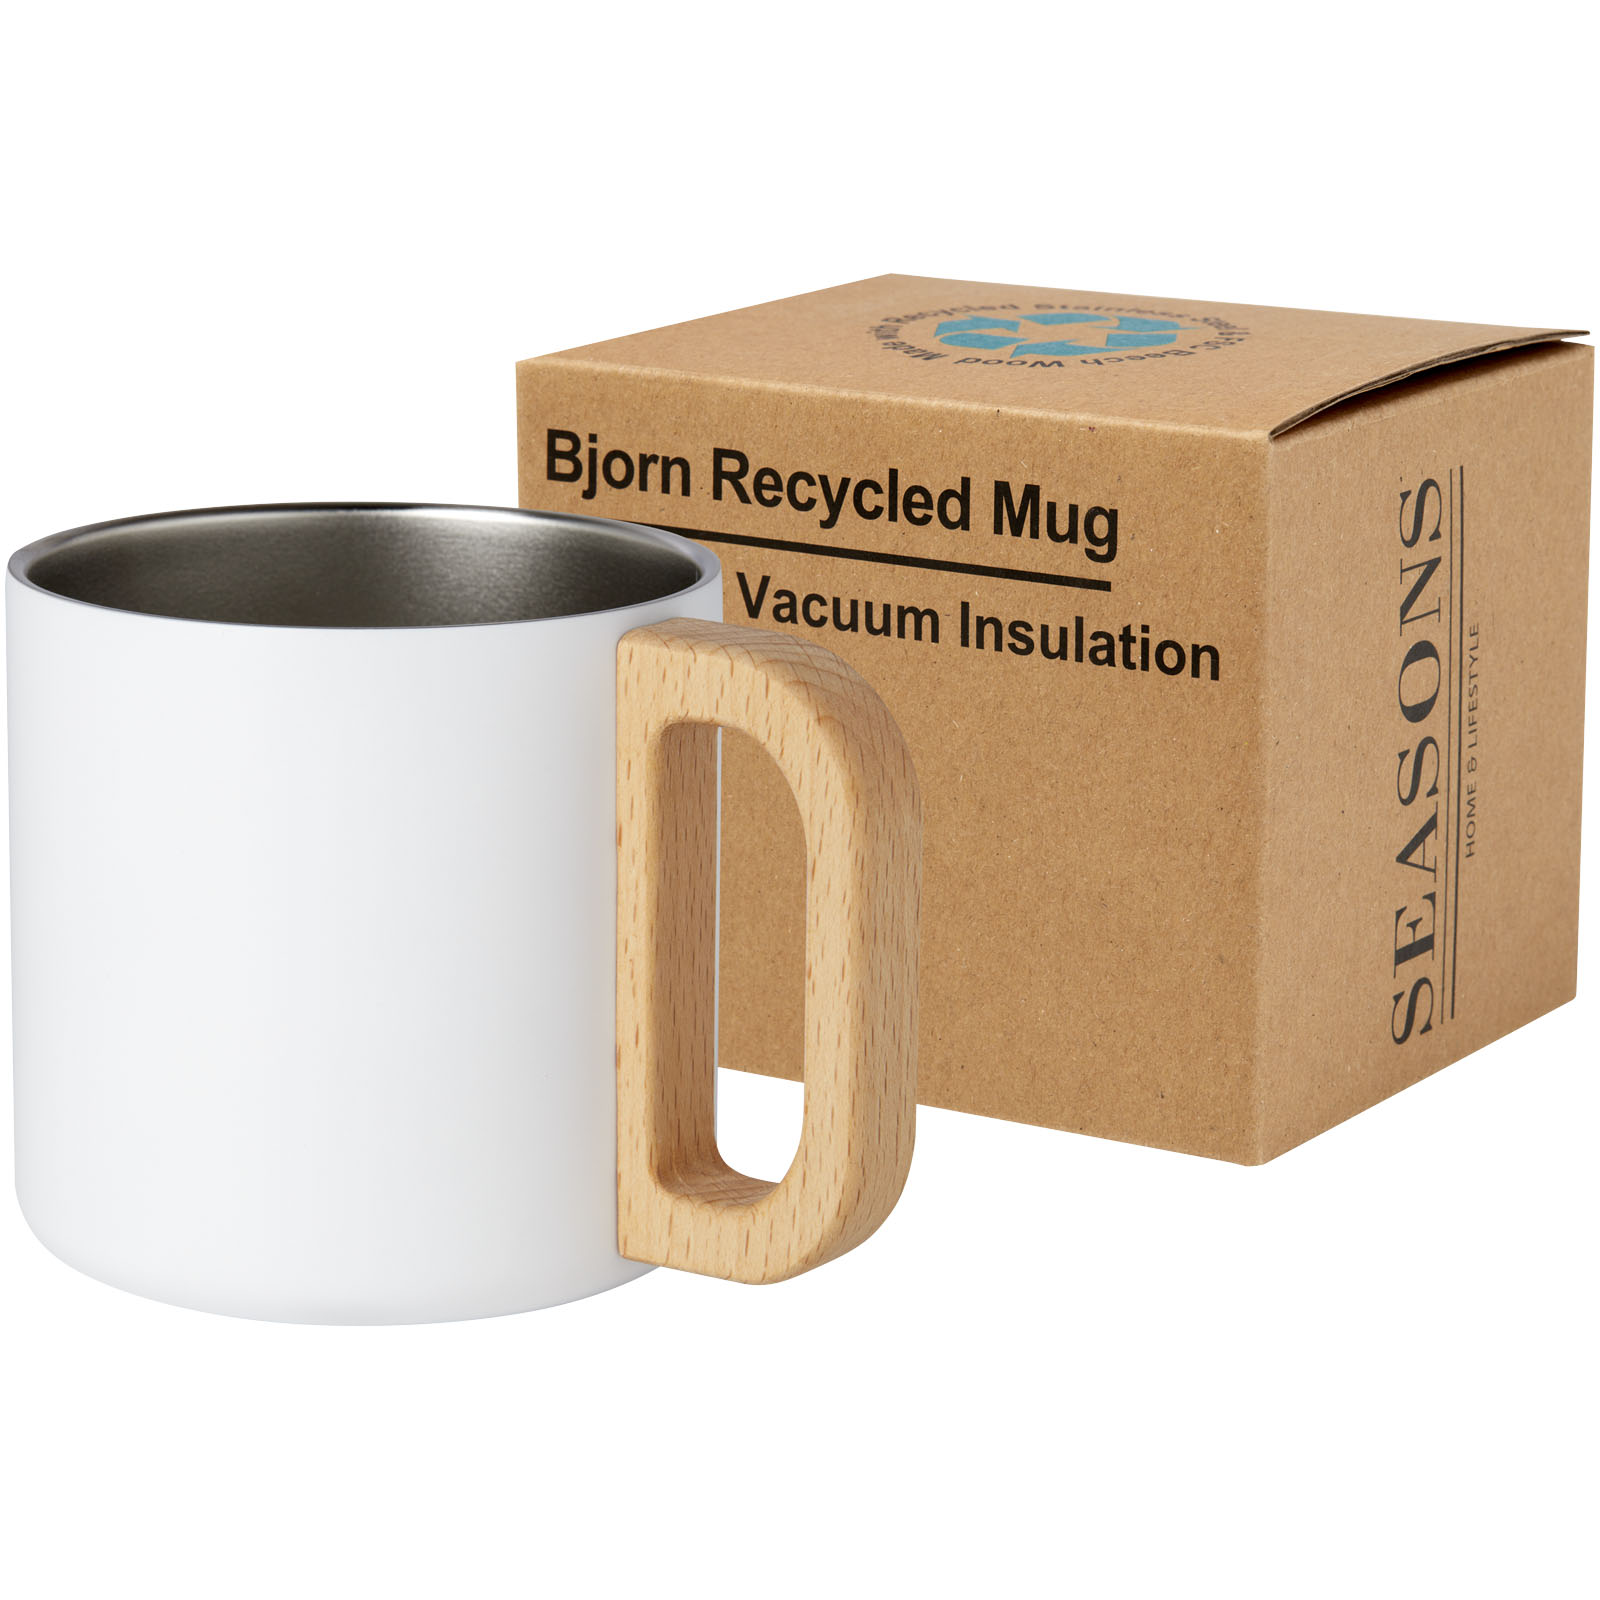 Drinkware - Bjorn 360 ml RCS certified recycled stainless steel mug with copper vacuum insulation